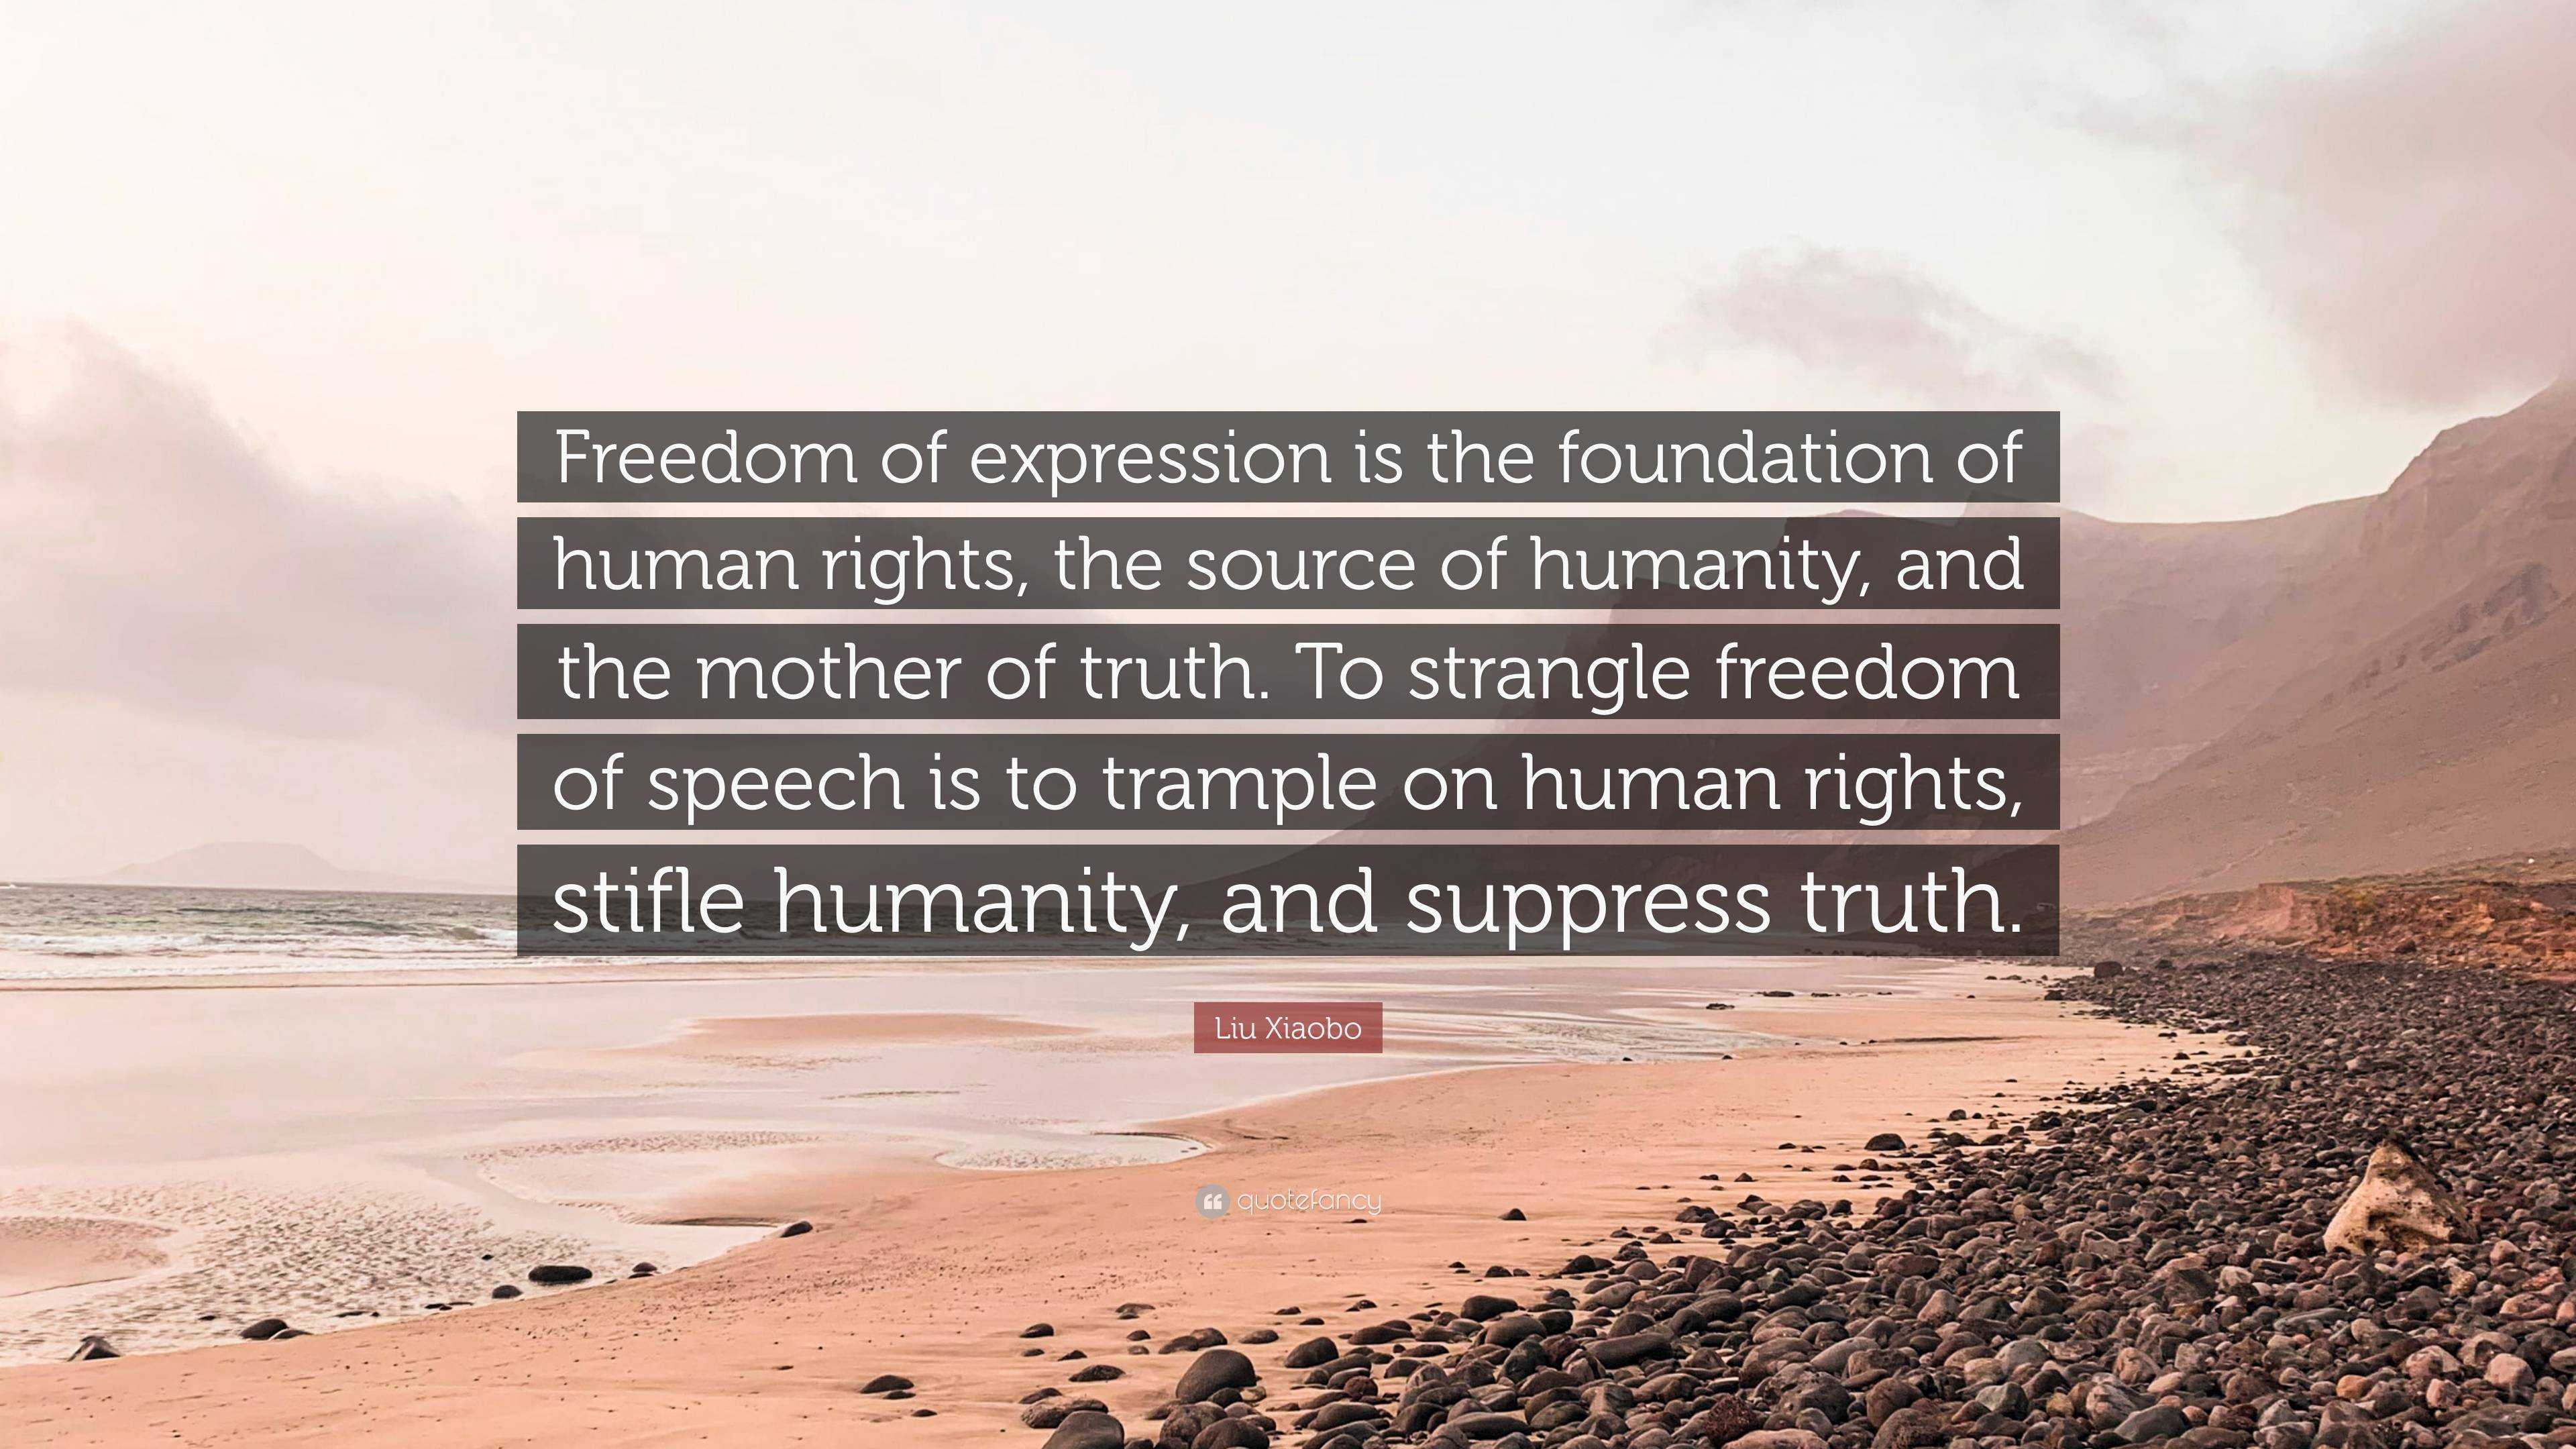 freedom of speech and expression quotes